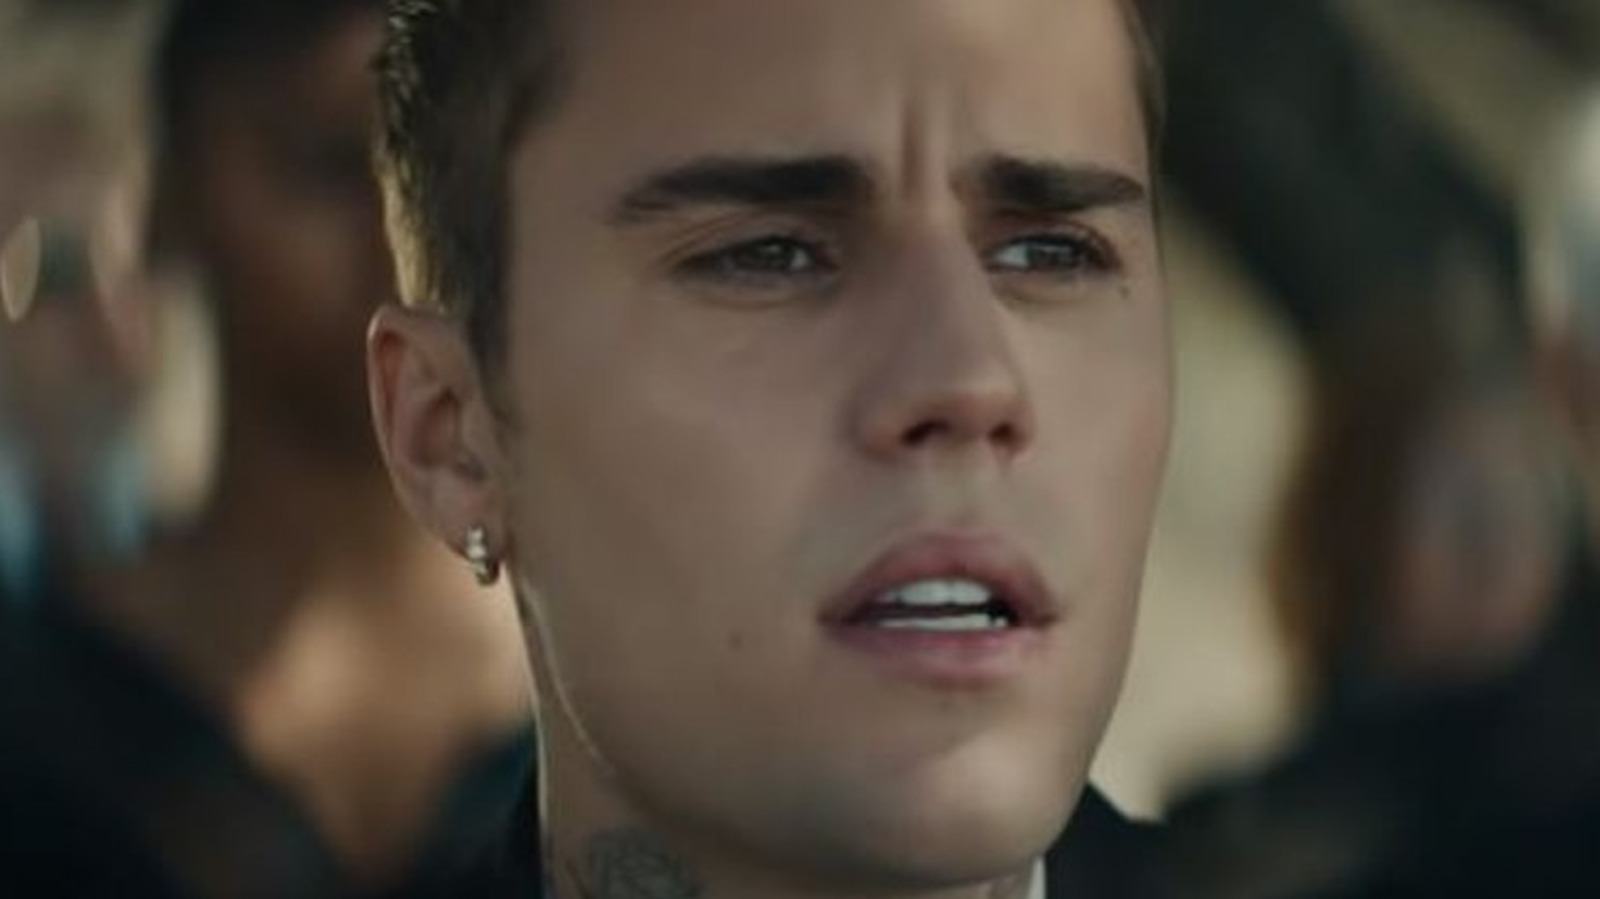 The Painful Meaning Behind the Song “Ghost” by Justin Bieber